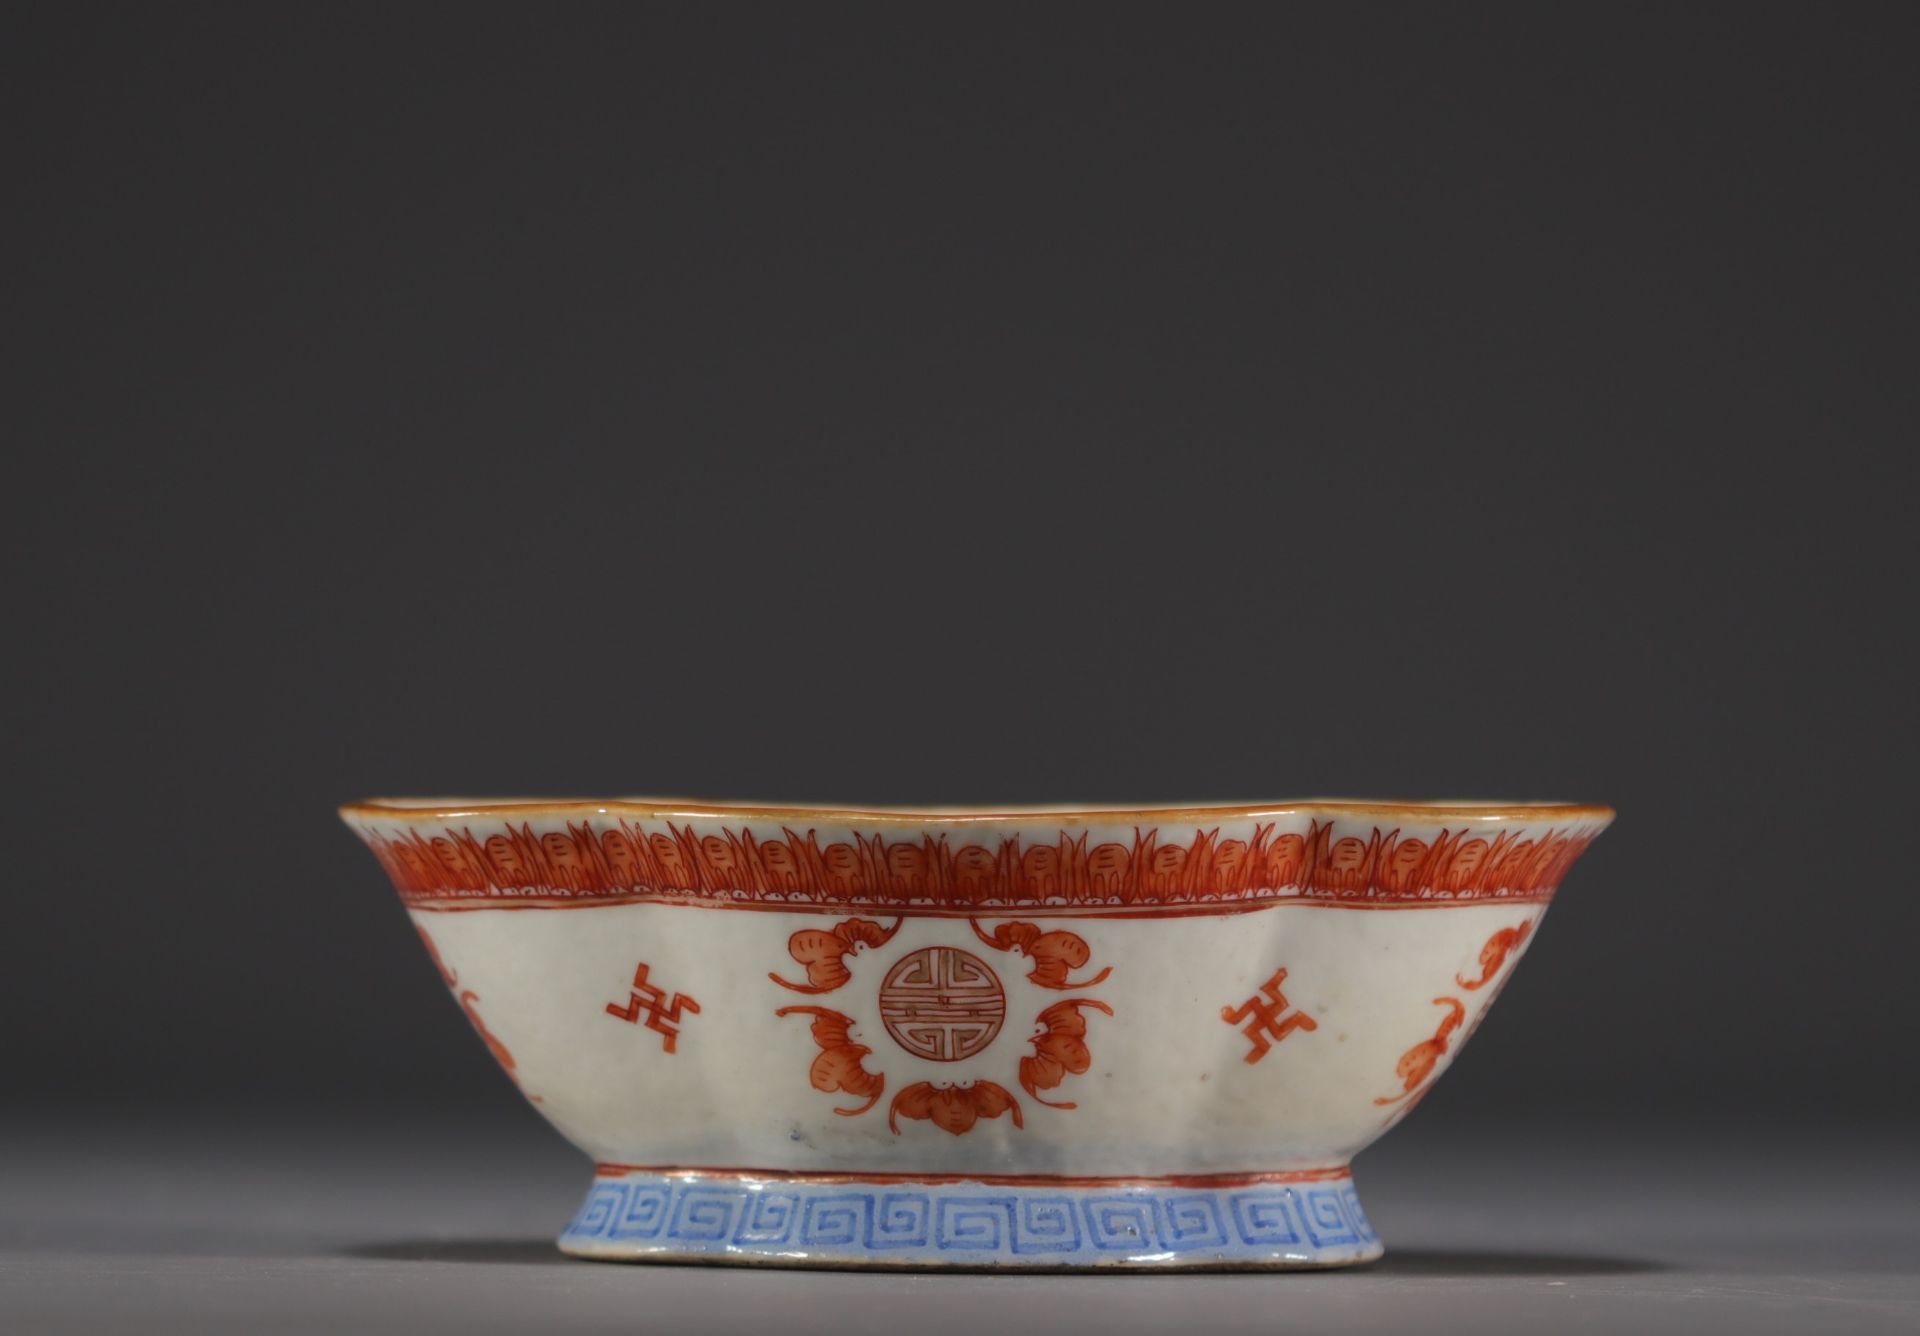 China - Polylobed porcelain bowl on a foot with bat decoration.